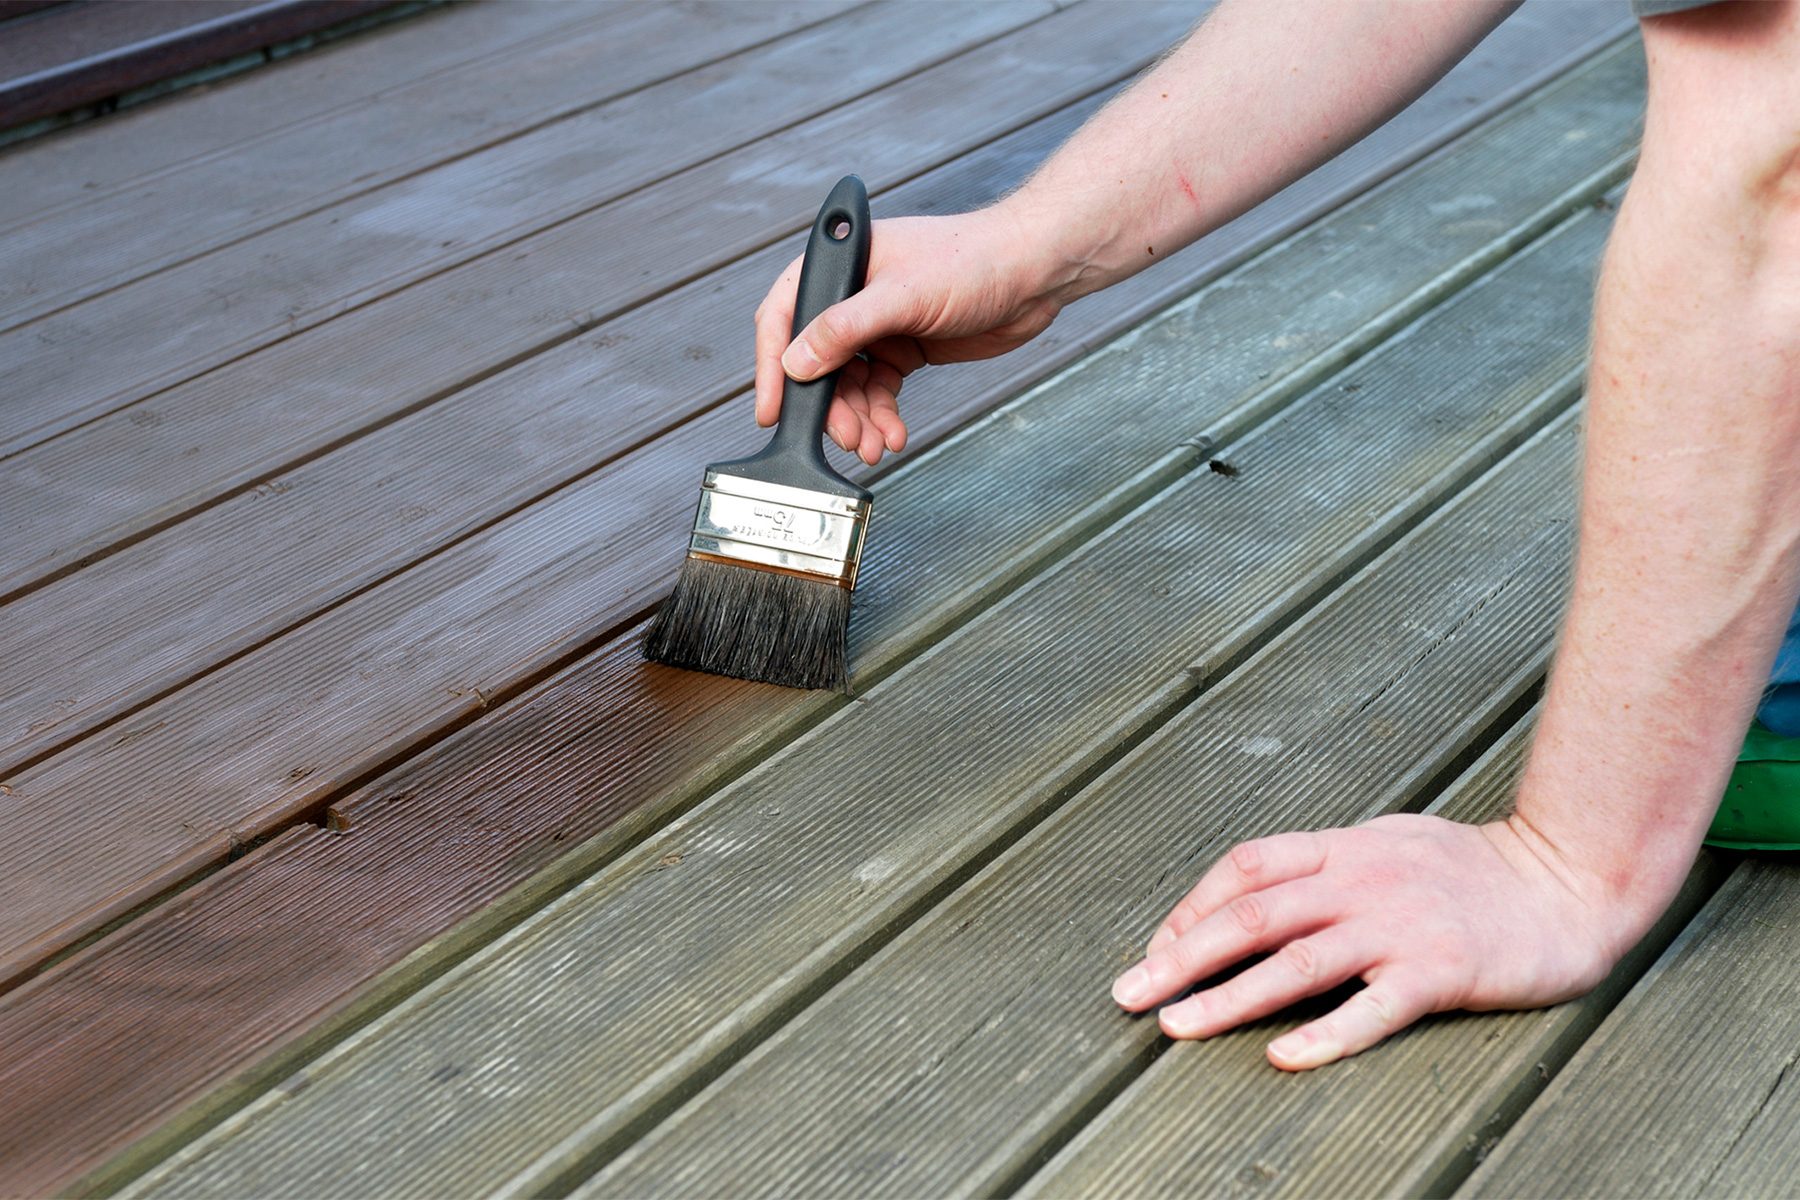 Can You Paint Composite Decking?